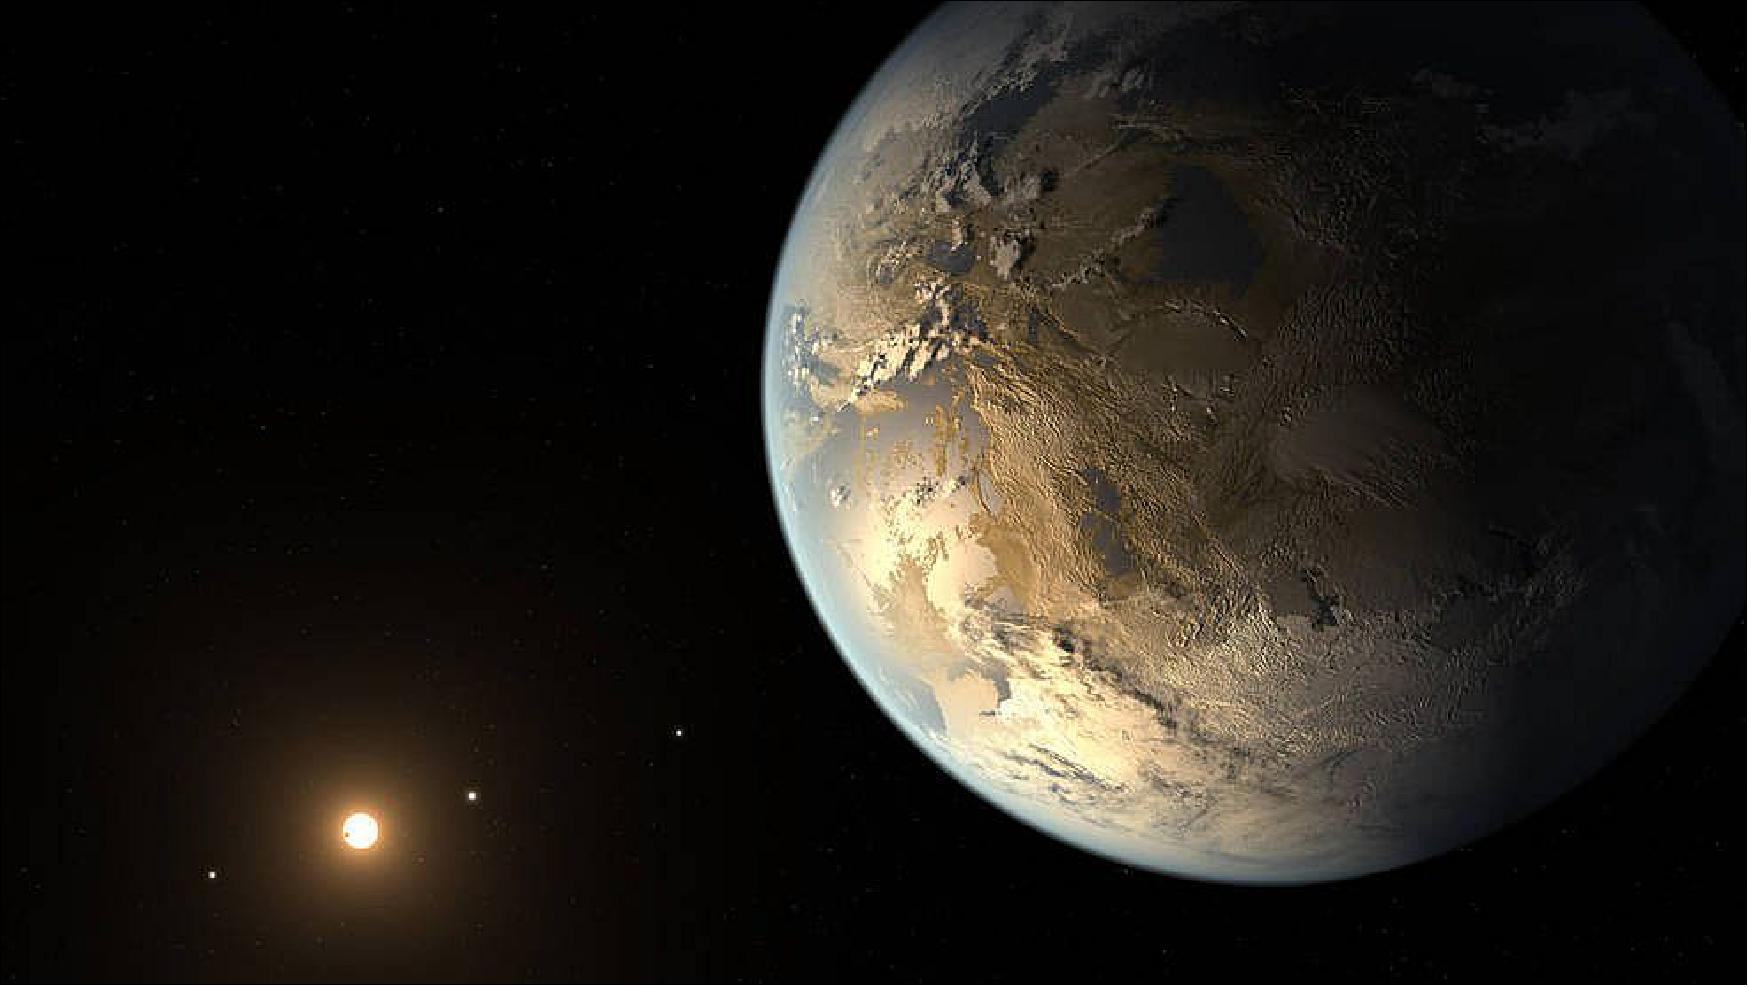 Figure 62: Kepler-186f resides in the Kepler-186 system about 500 light-years from Earth in the constellation Cygnus. The system is also home to four inner planets, seen lined up in orbit around a host star that is half the size and mass of the sun (image credit: NASA Ames/SETI Institute/JPL-Caltech)